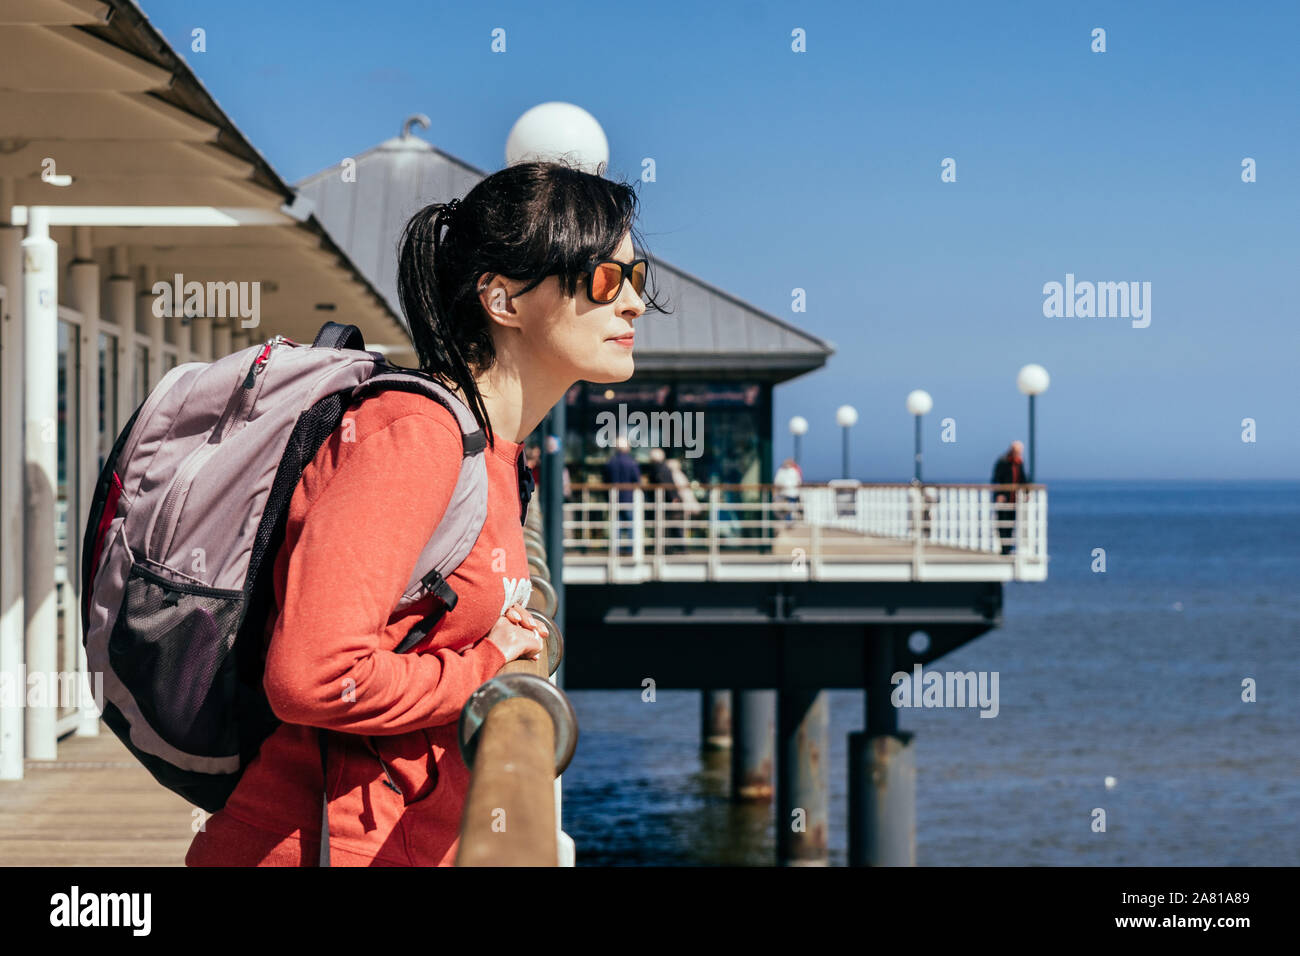 Woman enjoying her time over at the Baltic Sea during autumn and spring seasons. Stock Photo